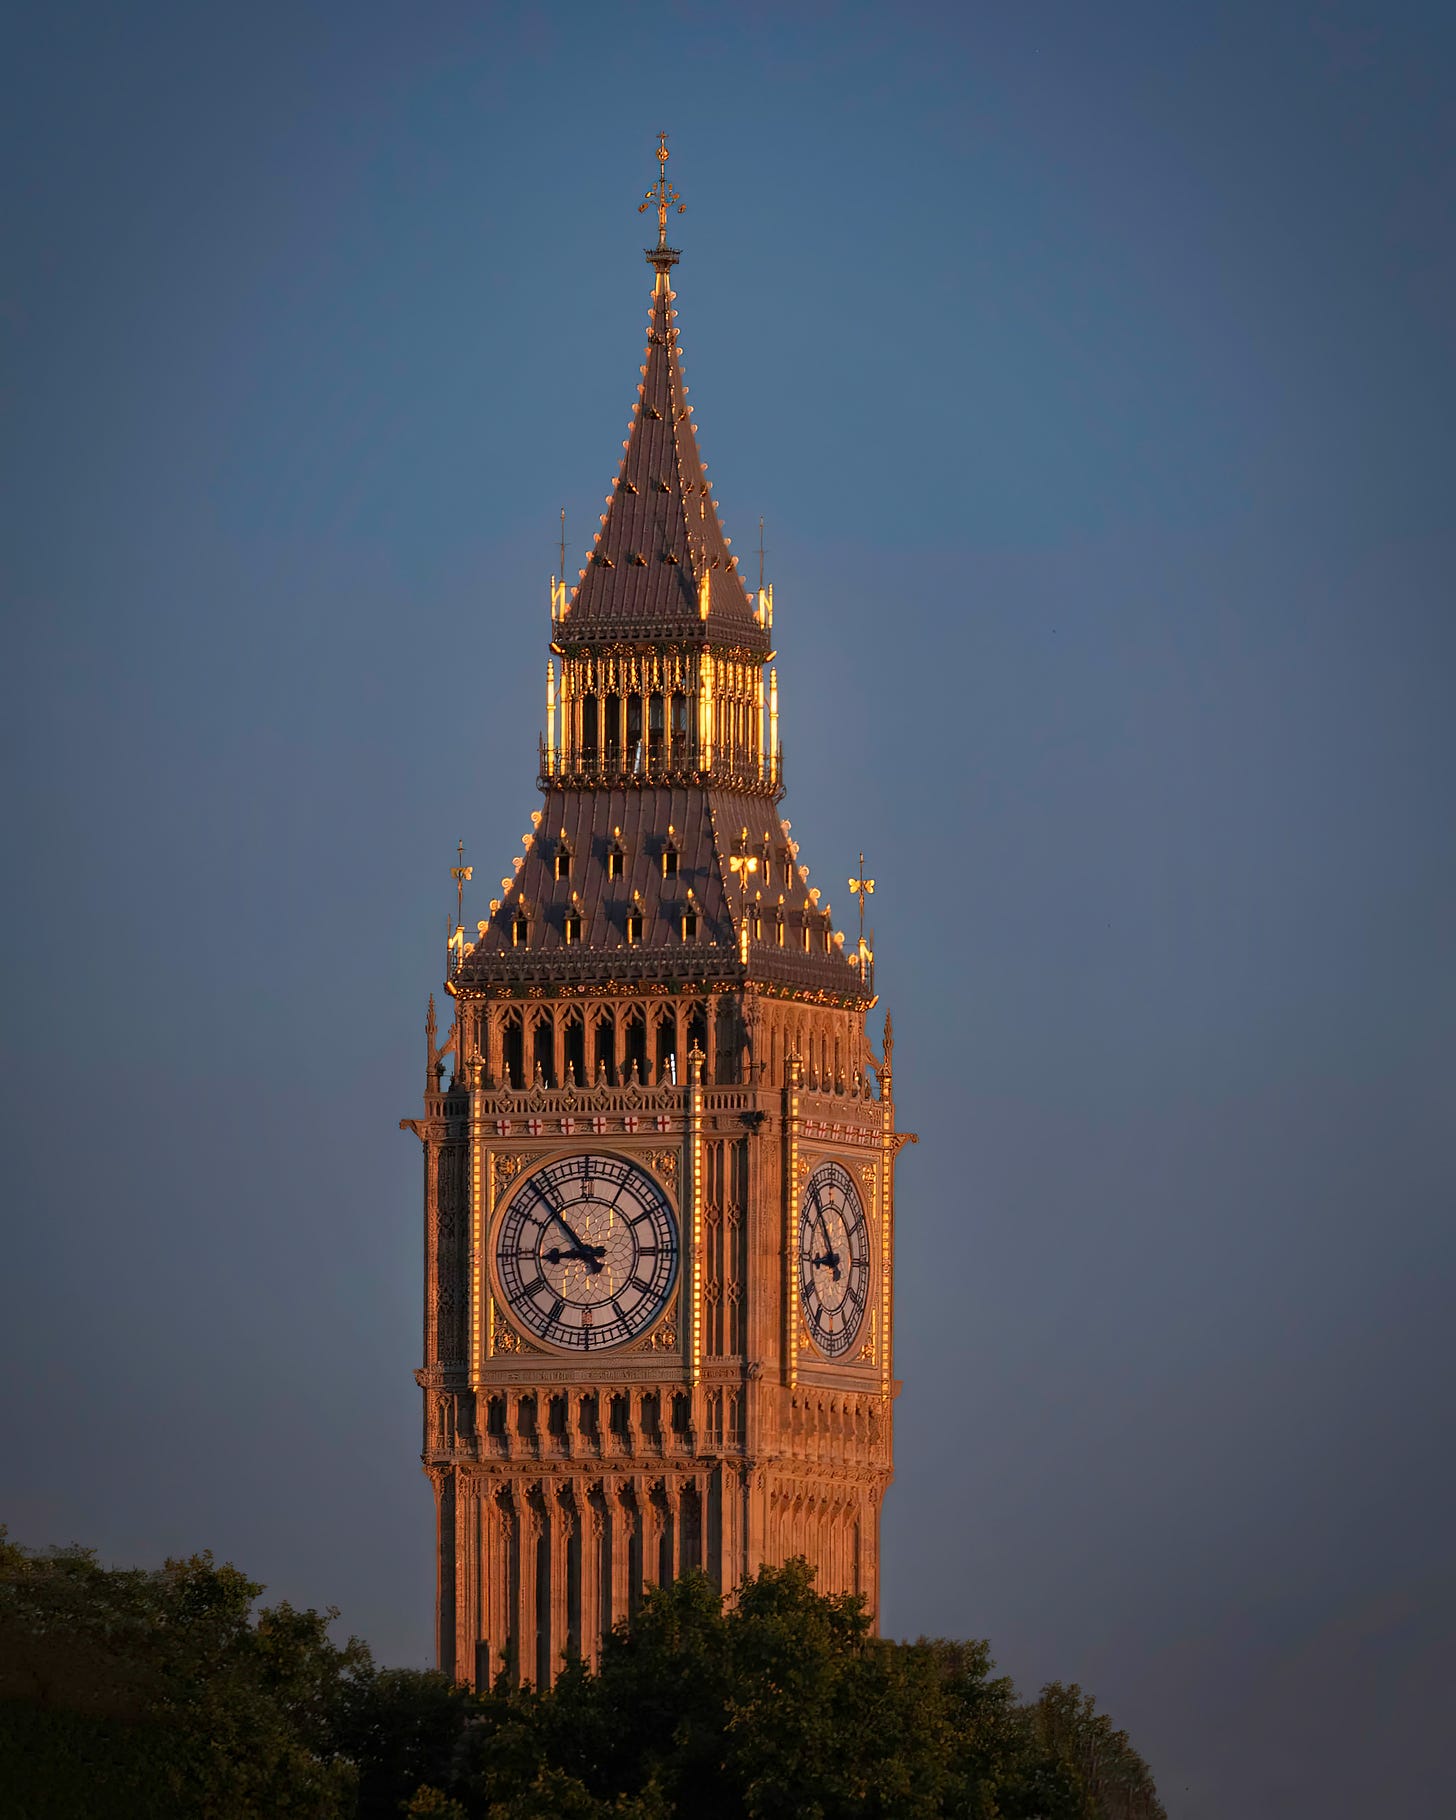 A photograph of the Big Ben on the elizabeth Tower in London with the gold lit from the setting sun against a dark blue sky with the tops of the trees in the lower foreground